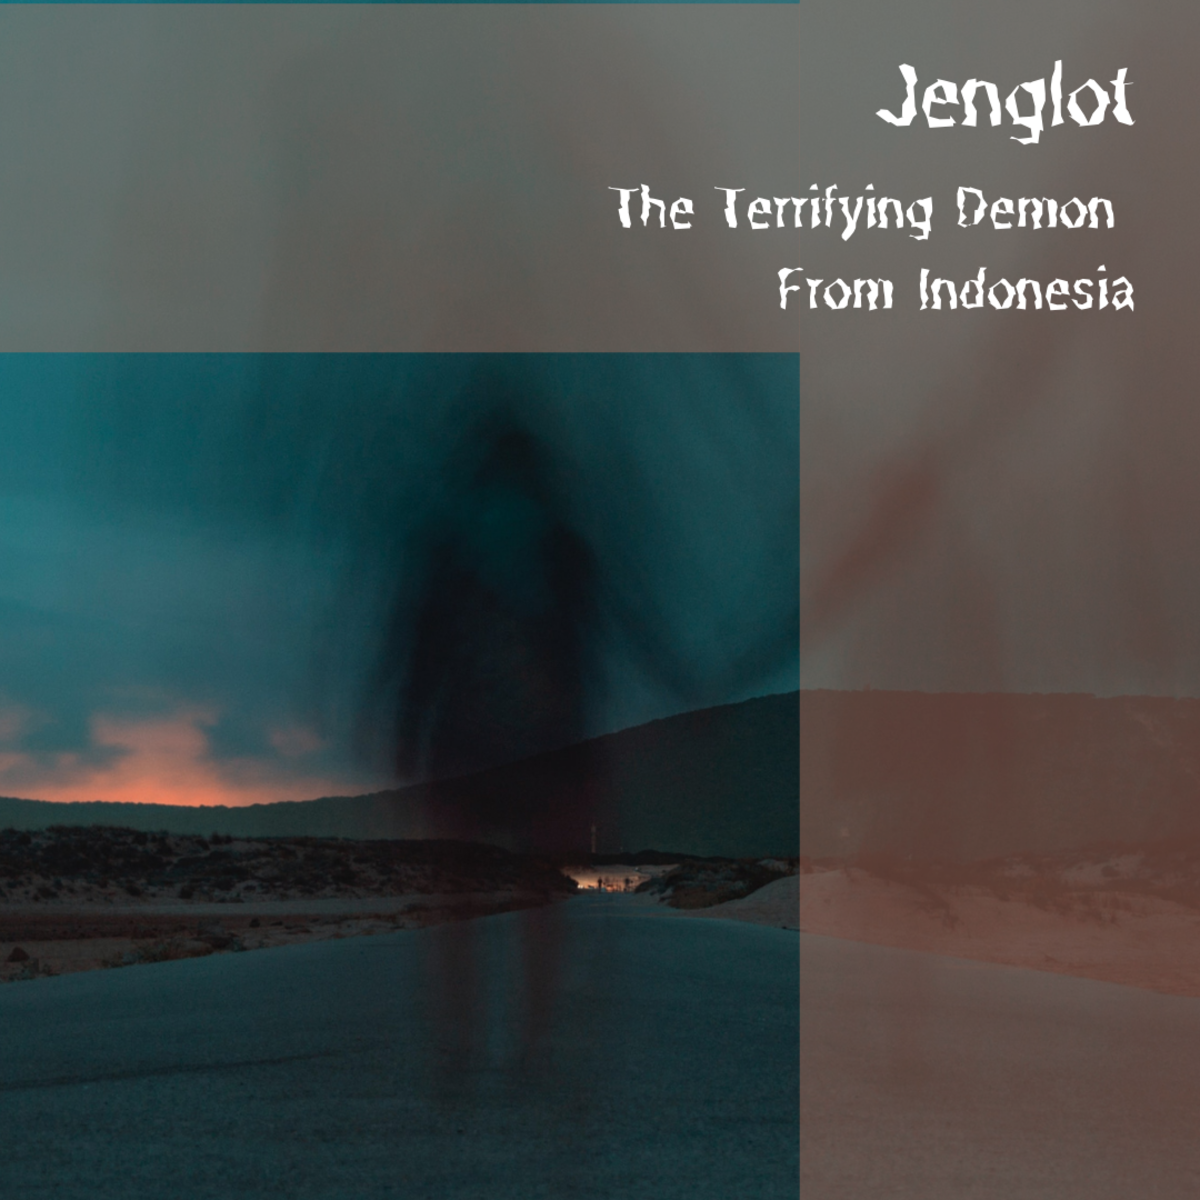 Jenglot: The Terrifying Demon From Indonesia